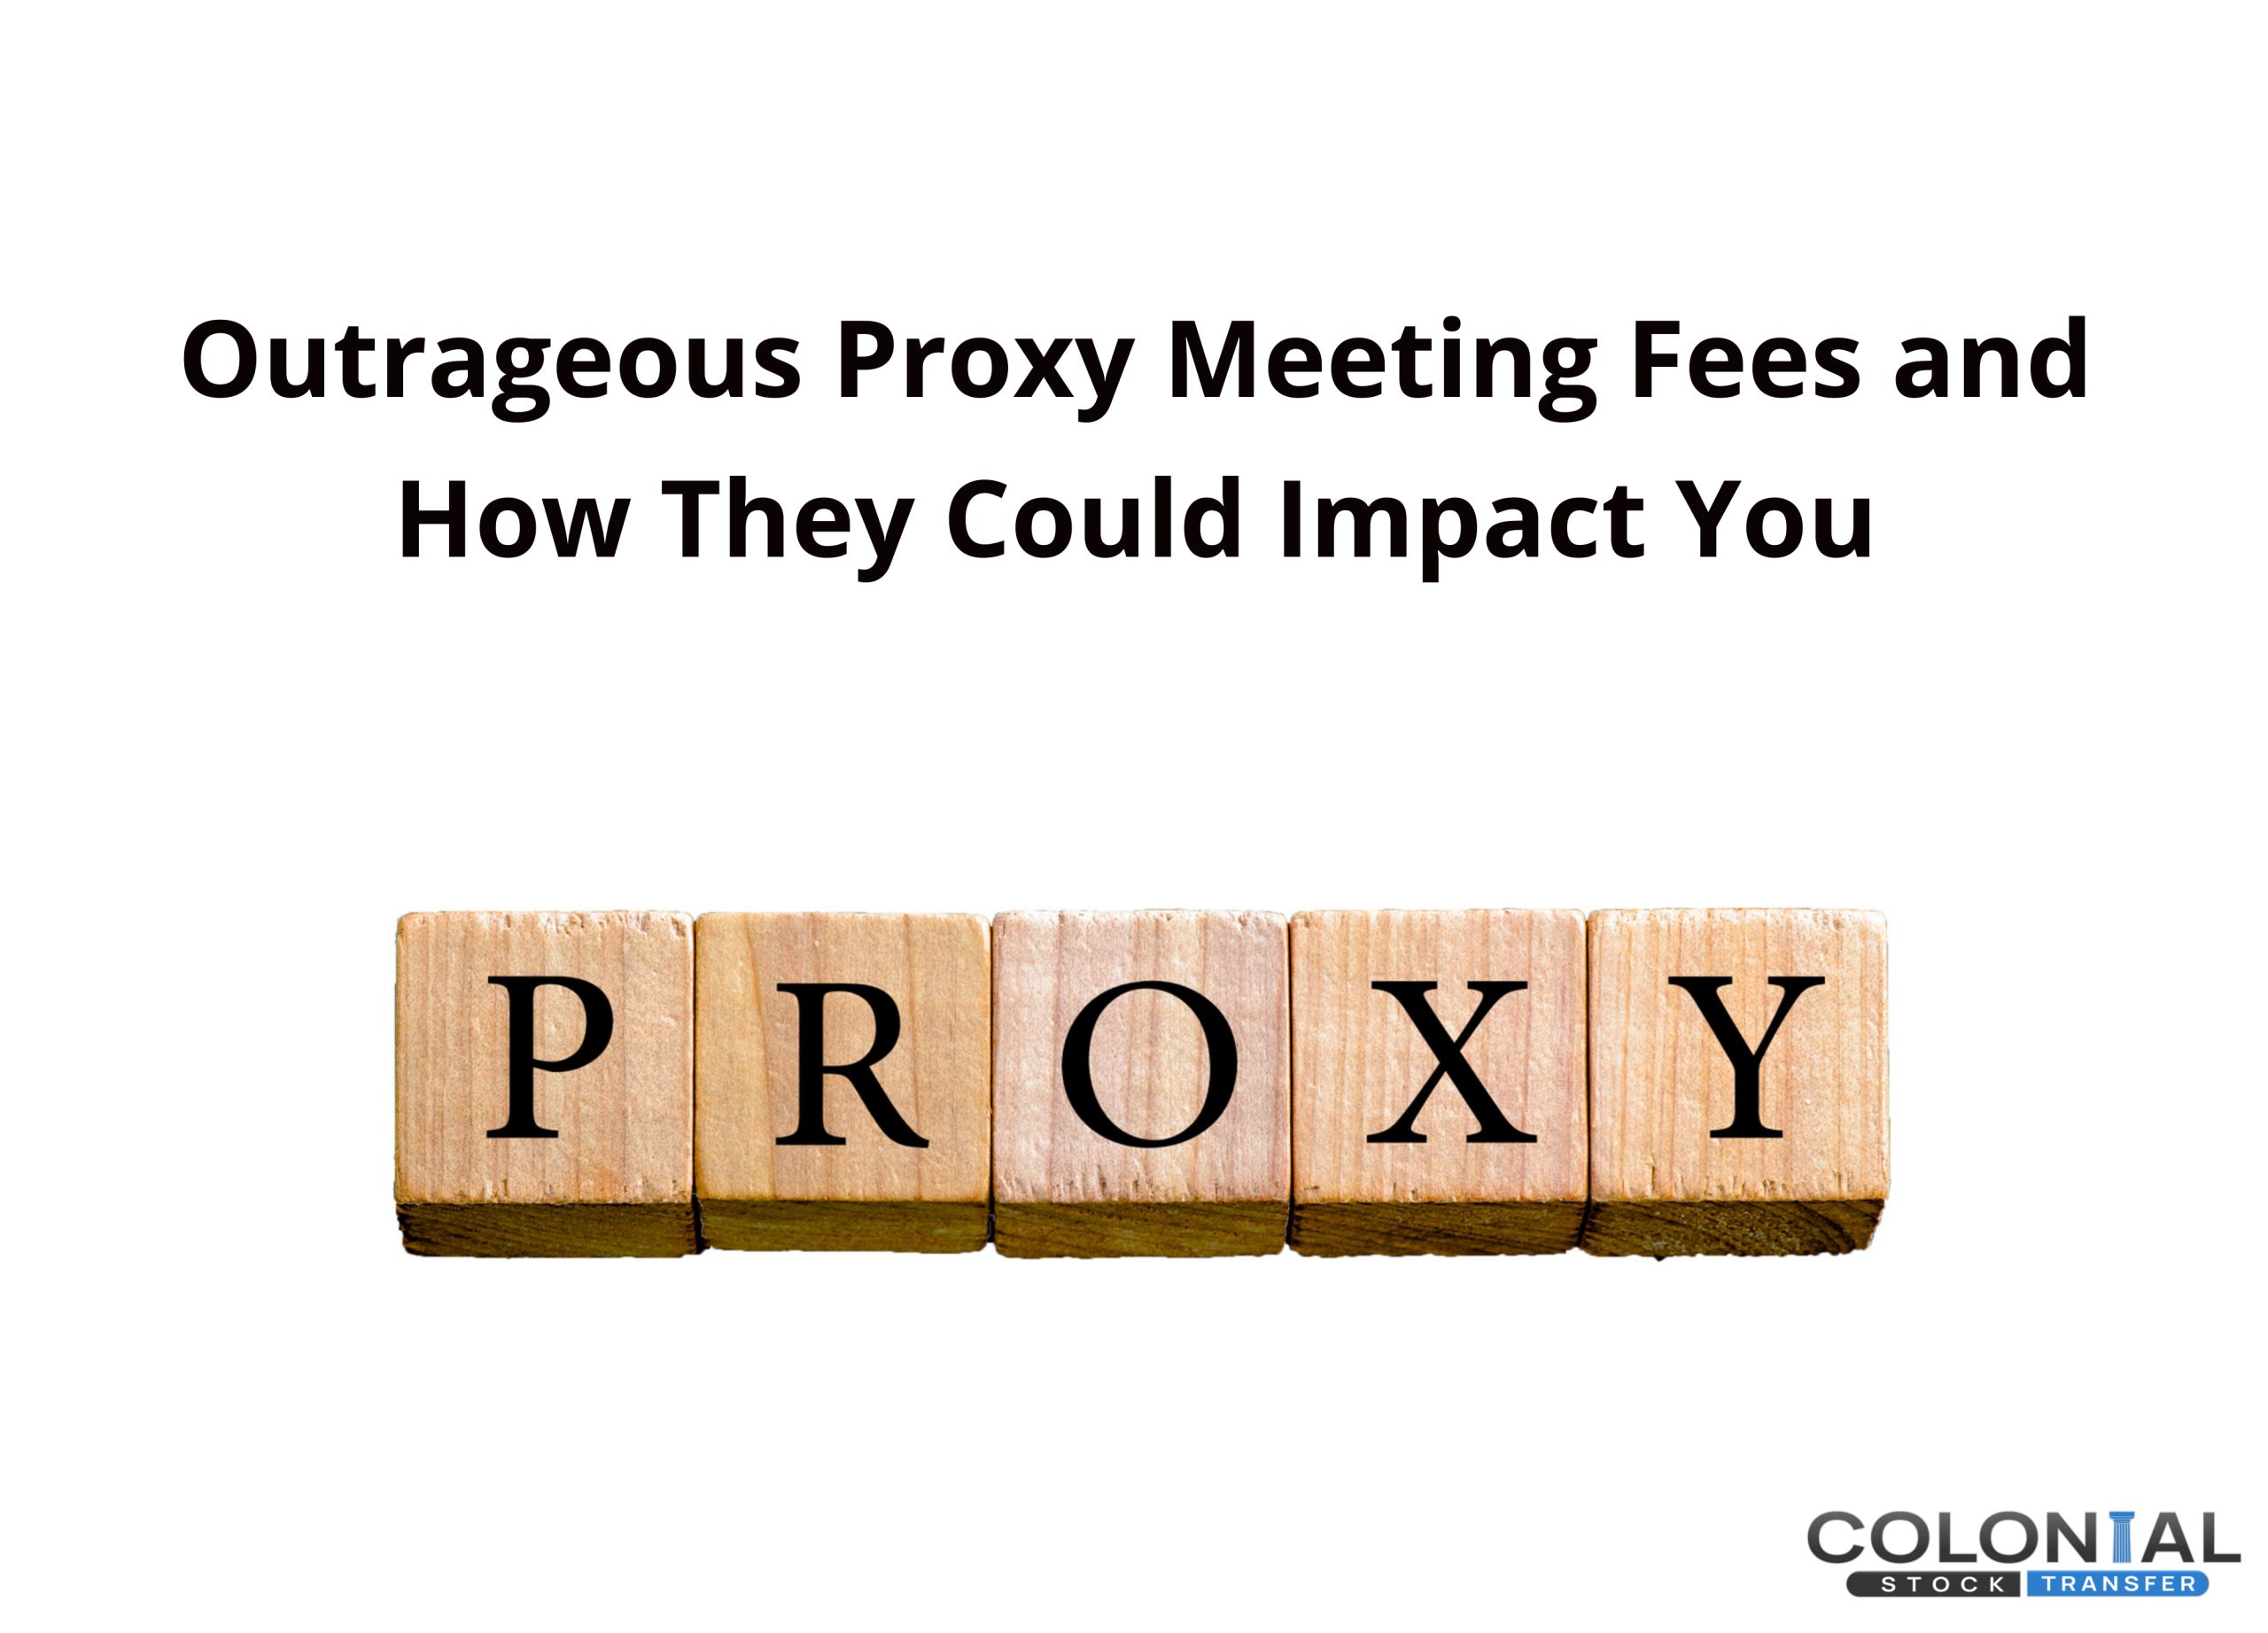 Outrageous Proxy Meeting Fees and How They Could Impact You